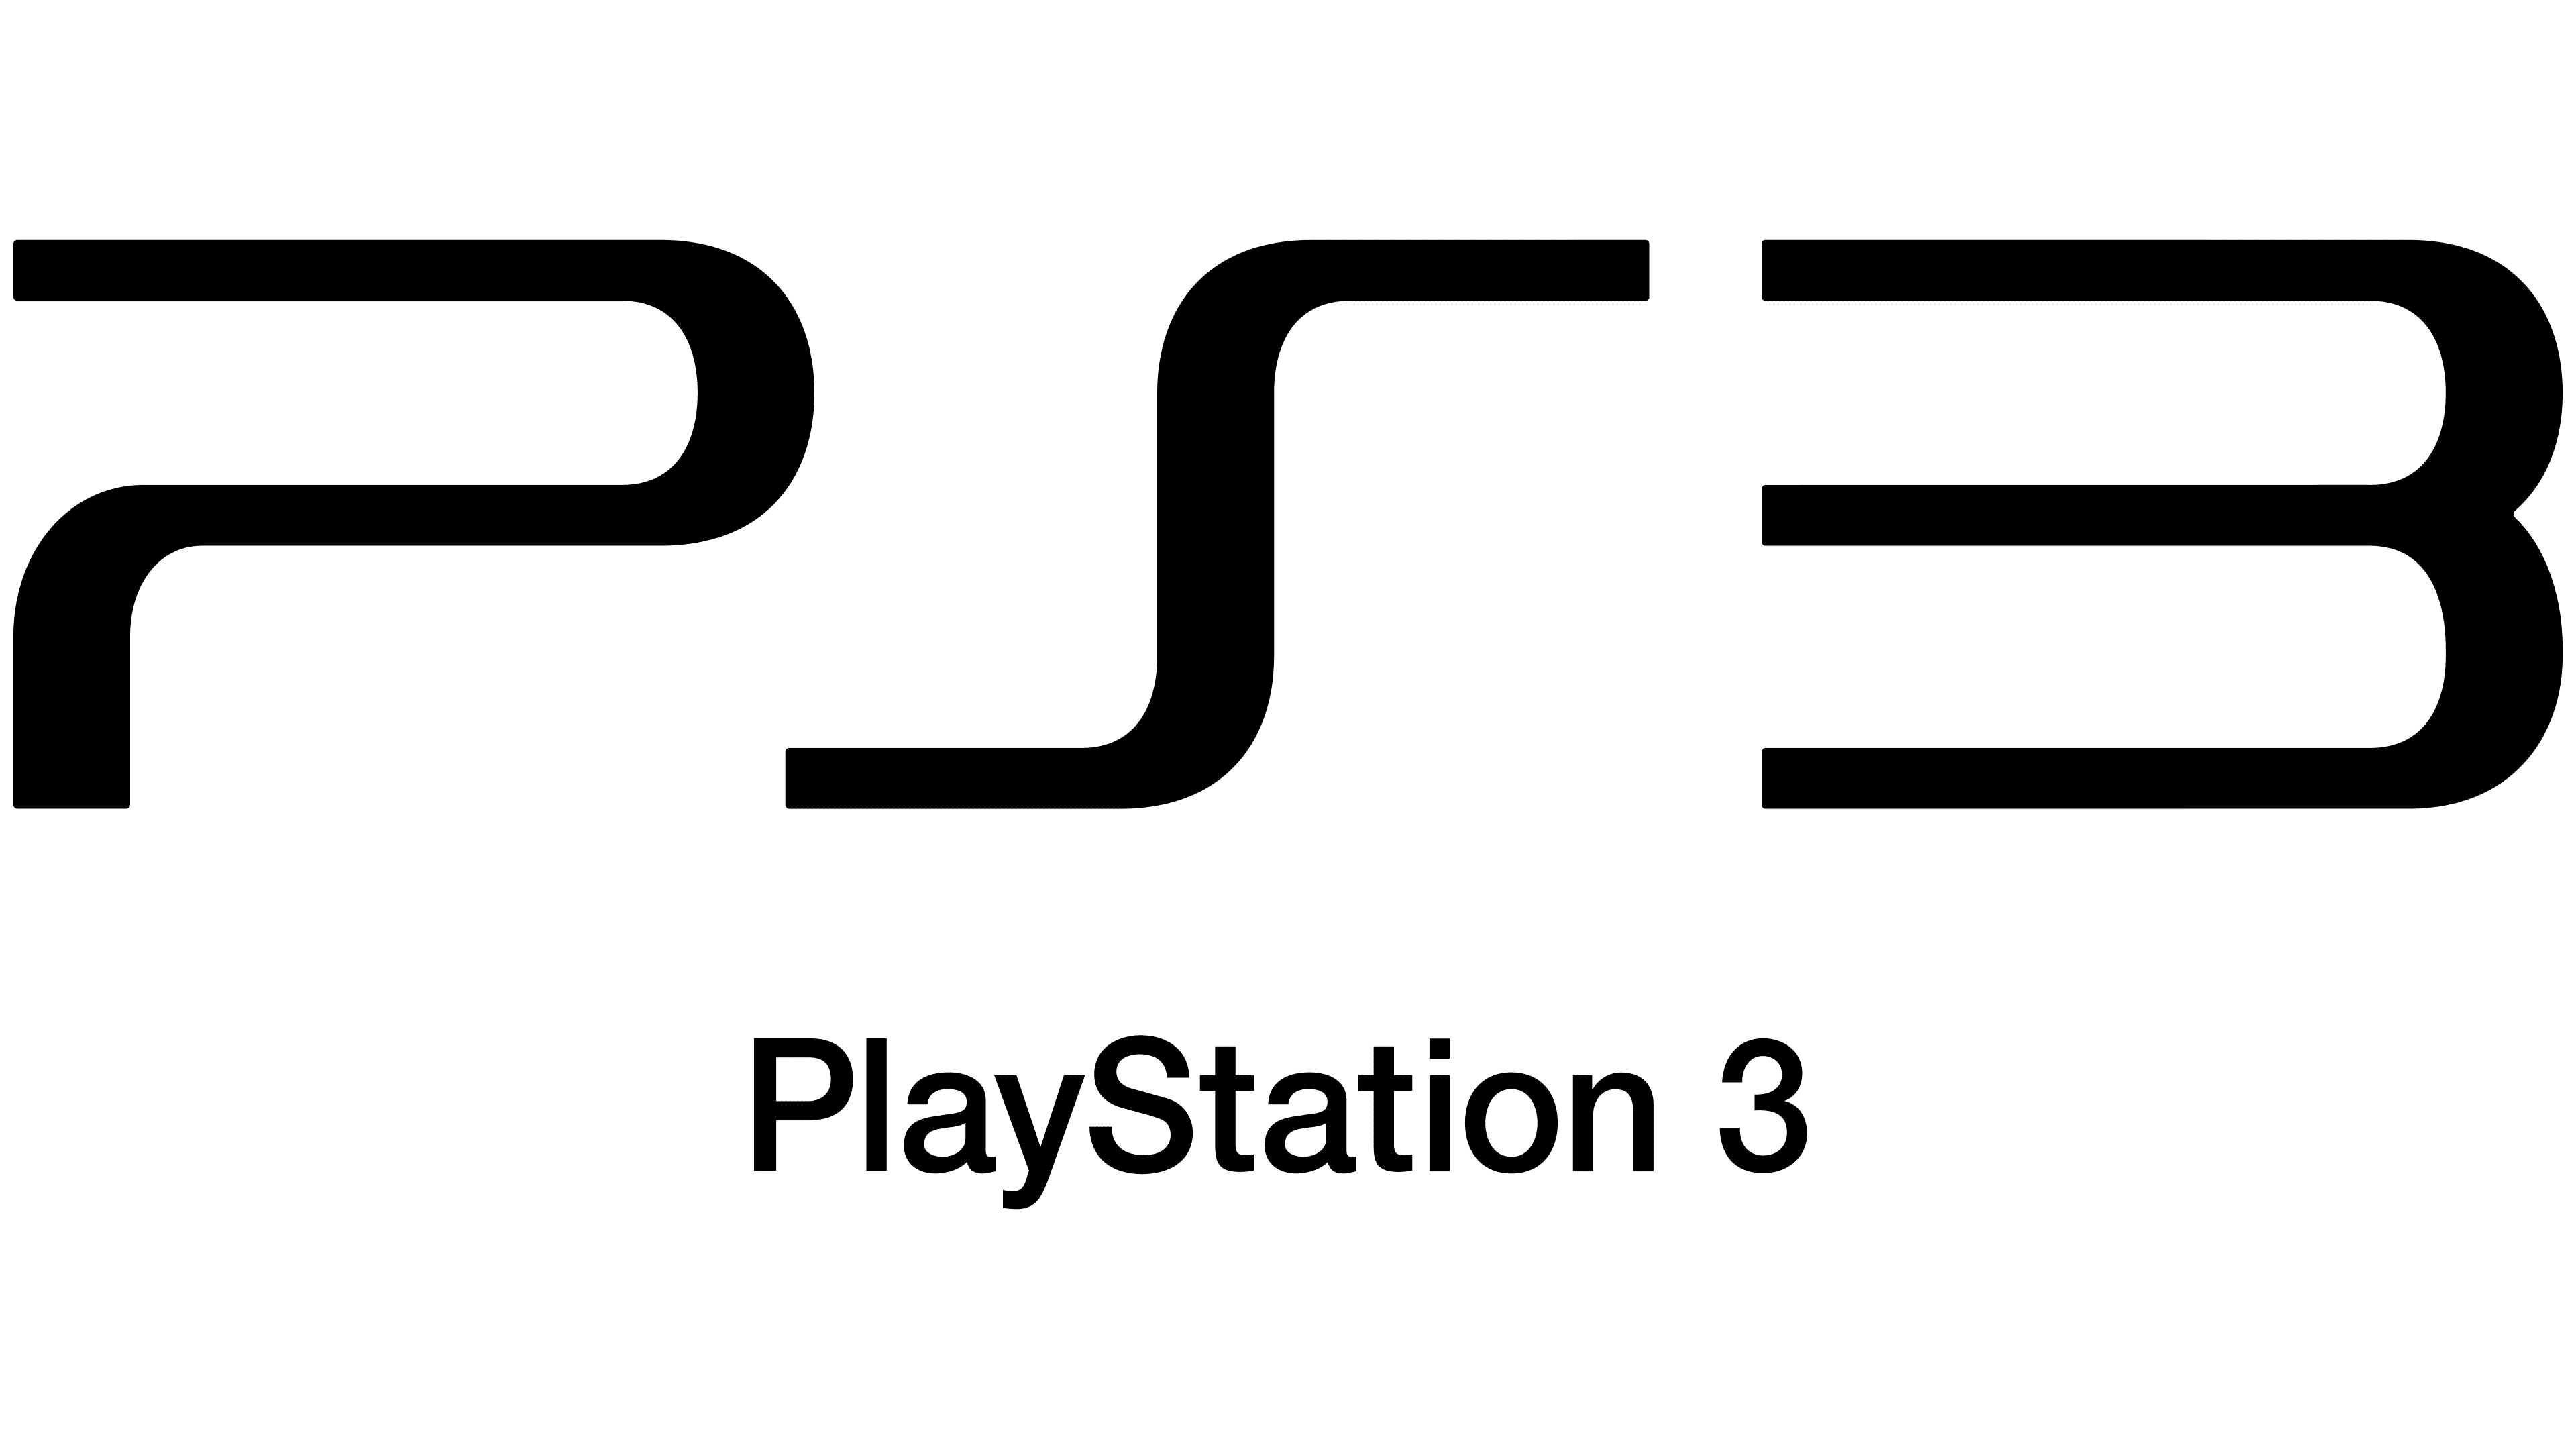 PS3 Logo, symbol, meaning, history, PNG, brand